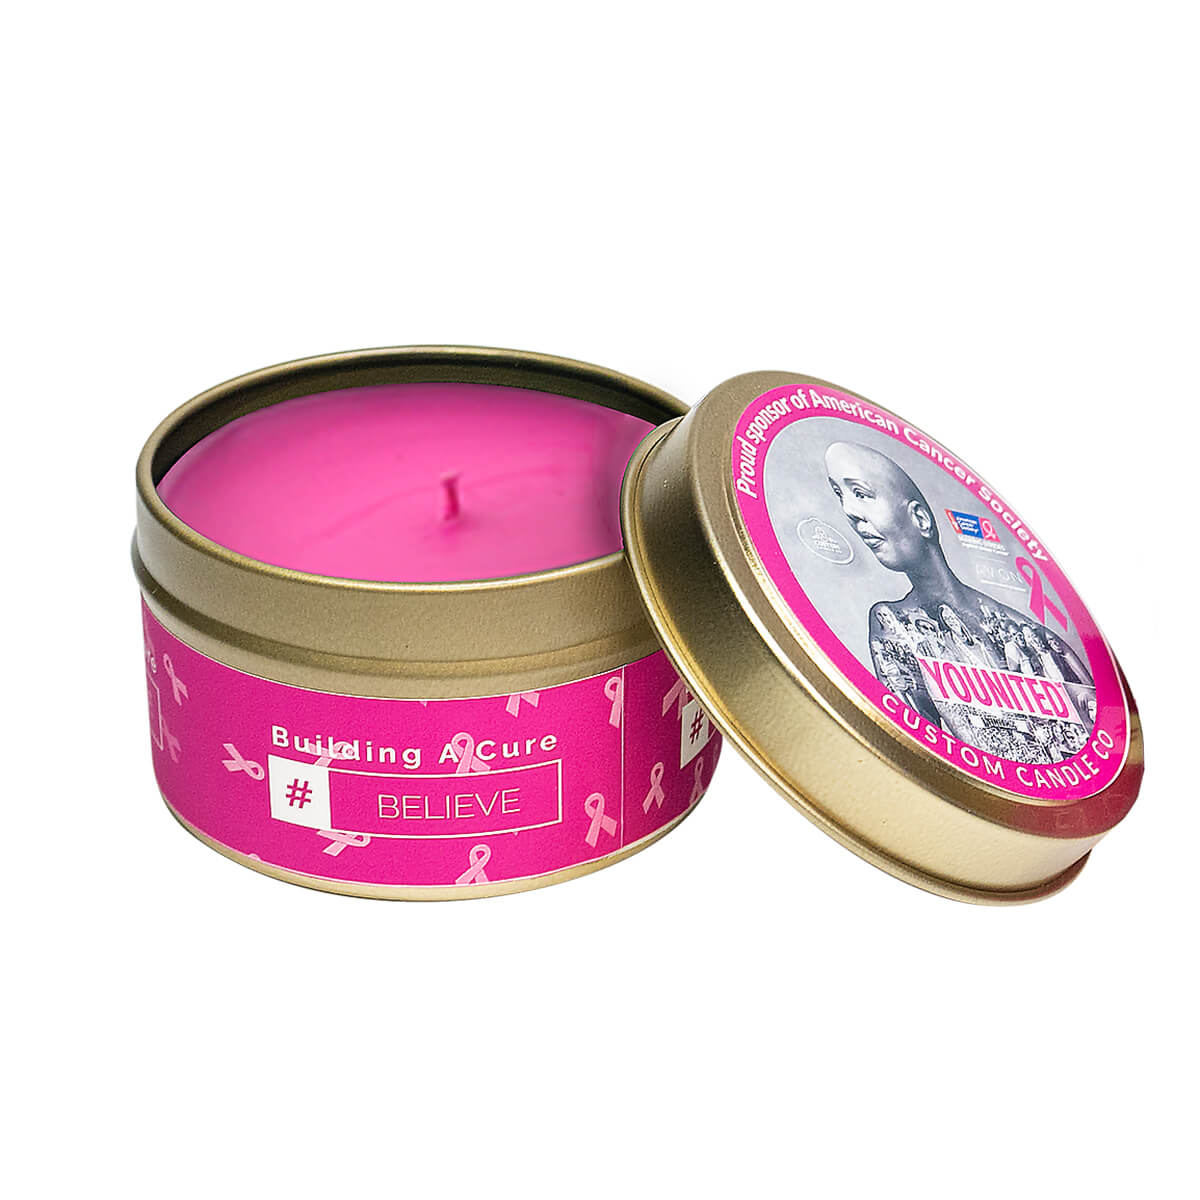 Against Breast Cancer Tin Candle